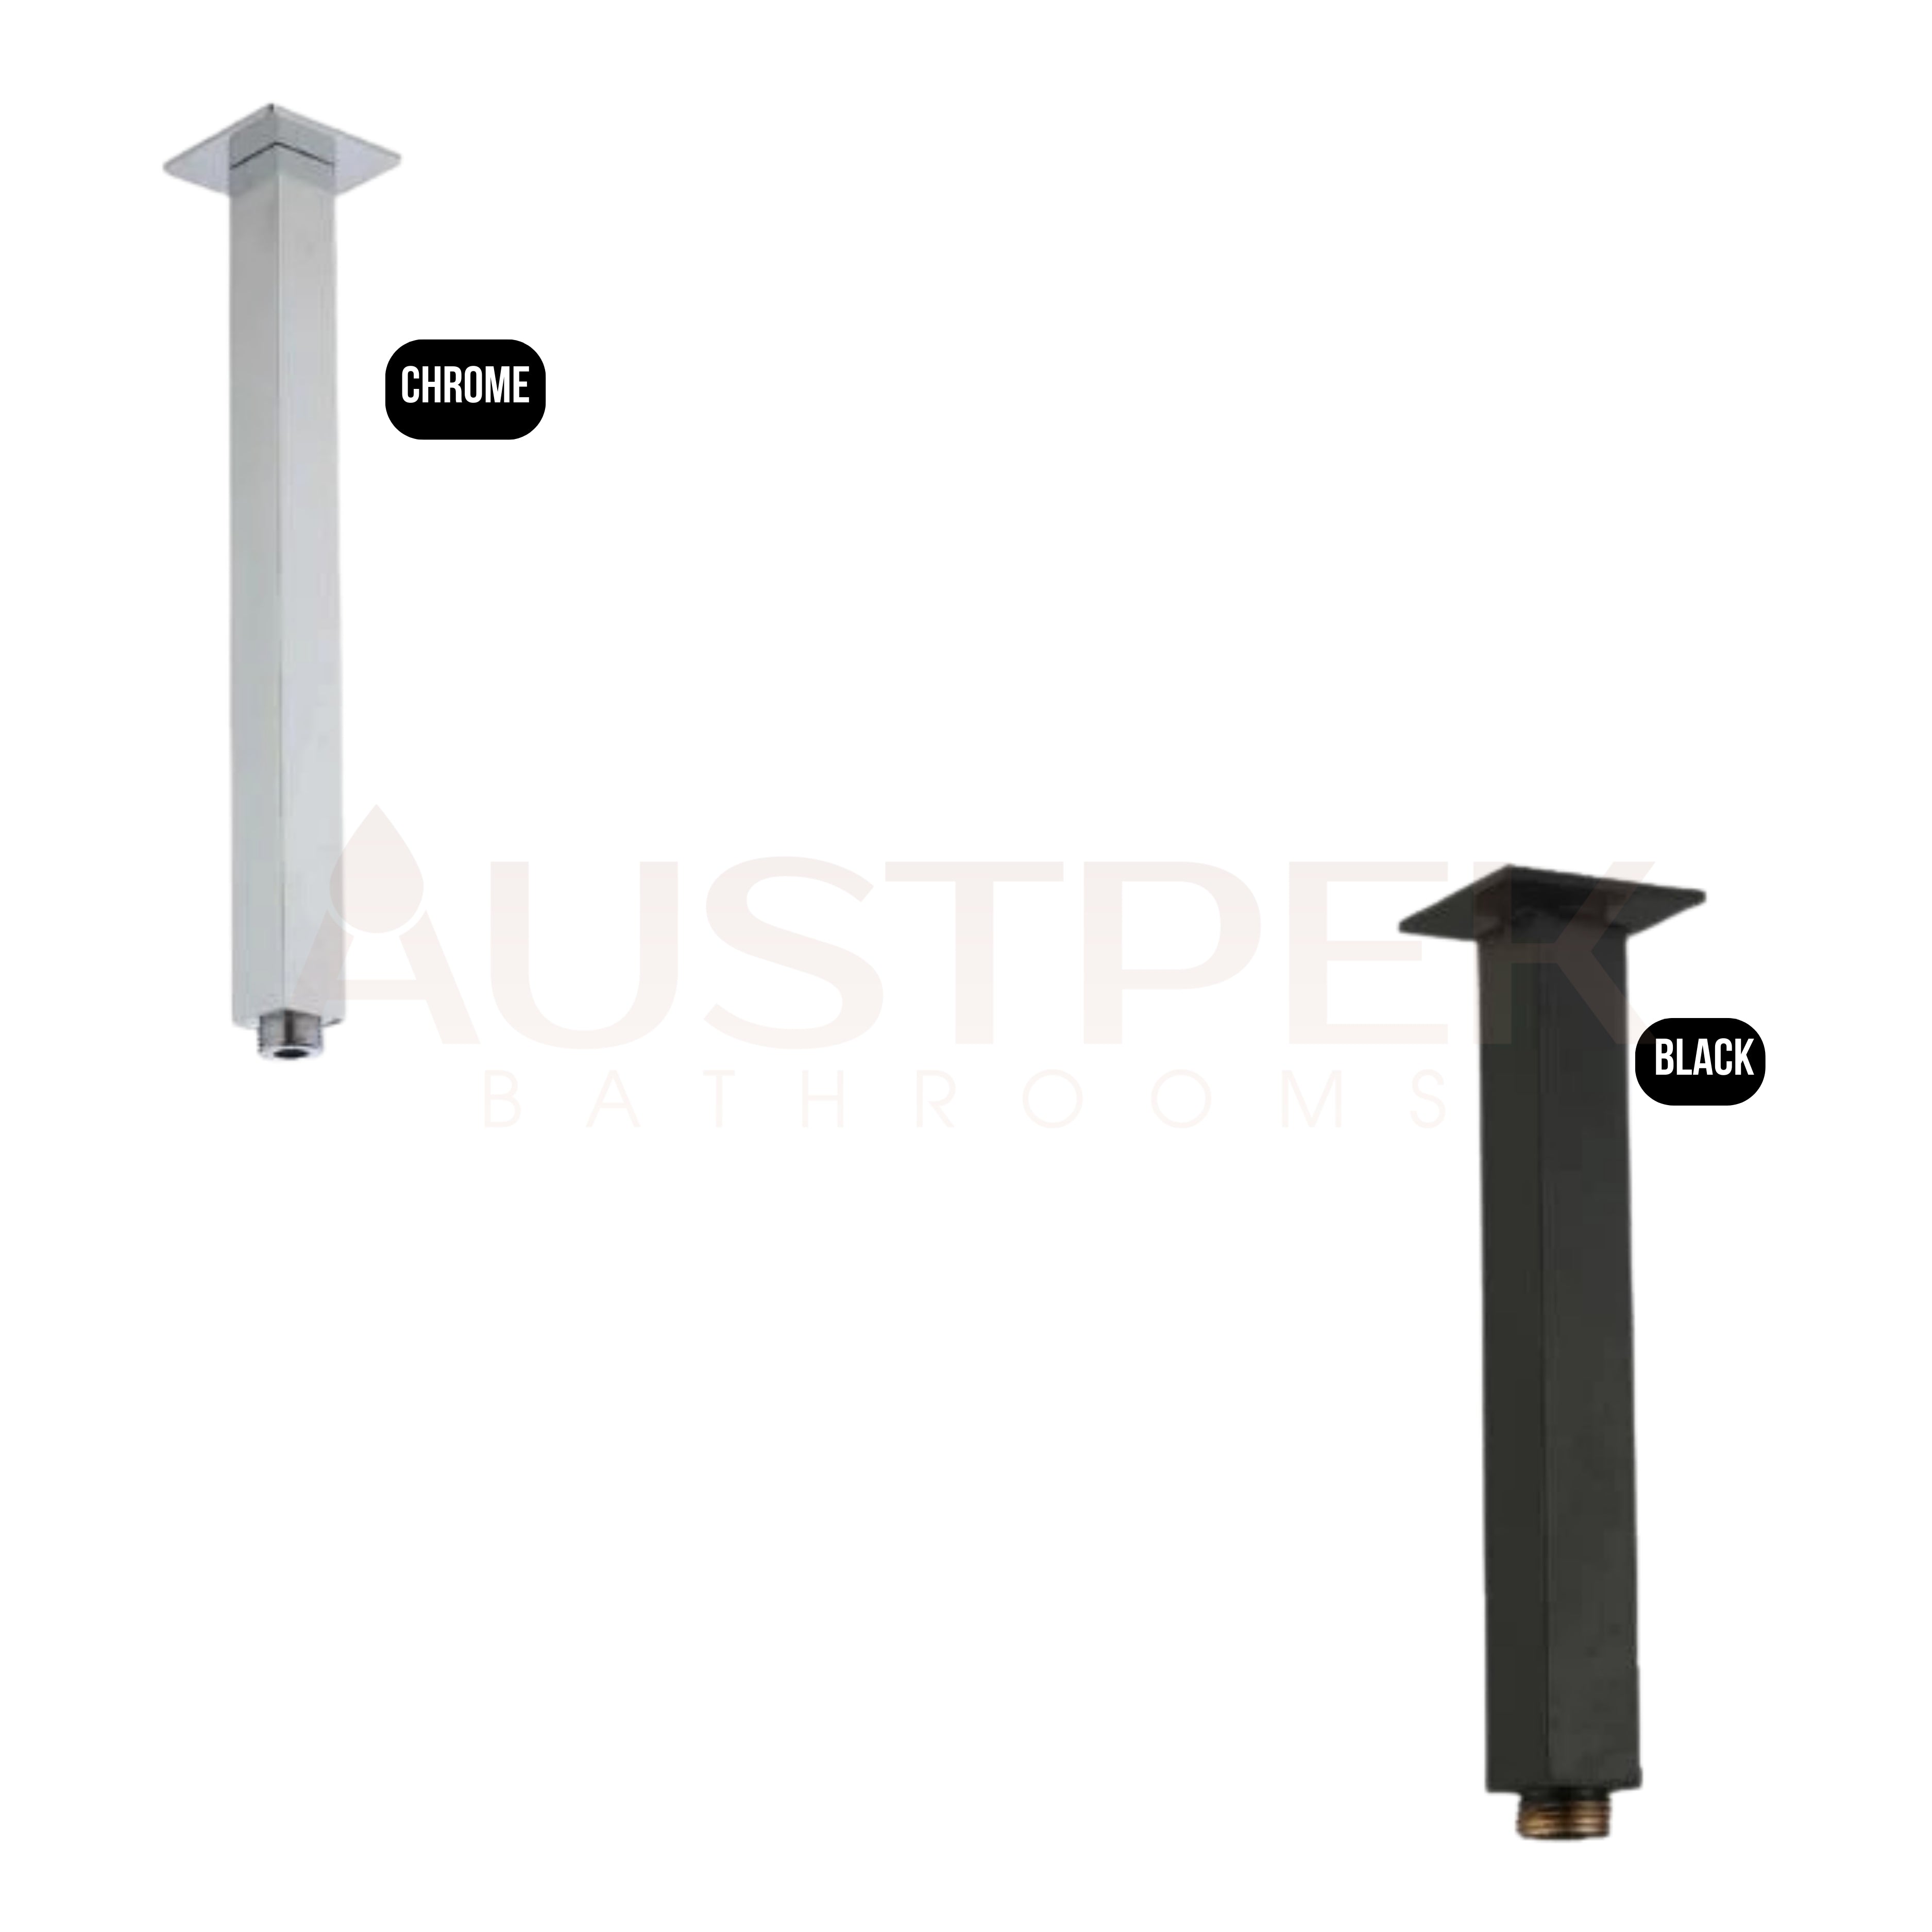 HELLYCAR ERIC CEILING SHOWER ARM BLACK 100MM, 200MM, 300MM AND 400MM